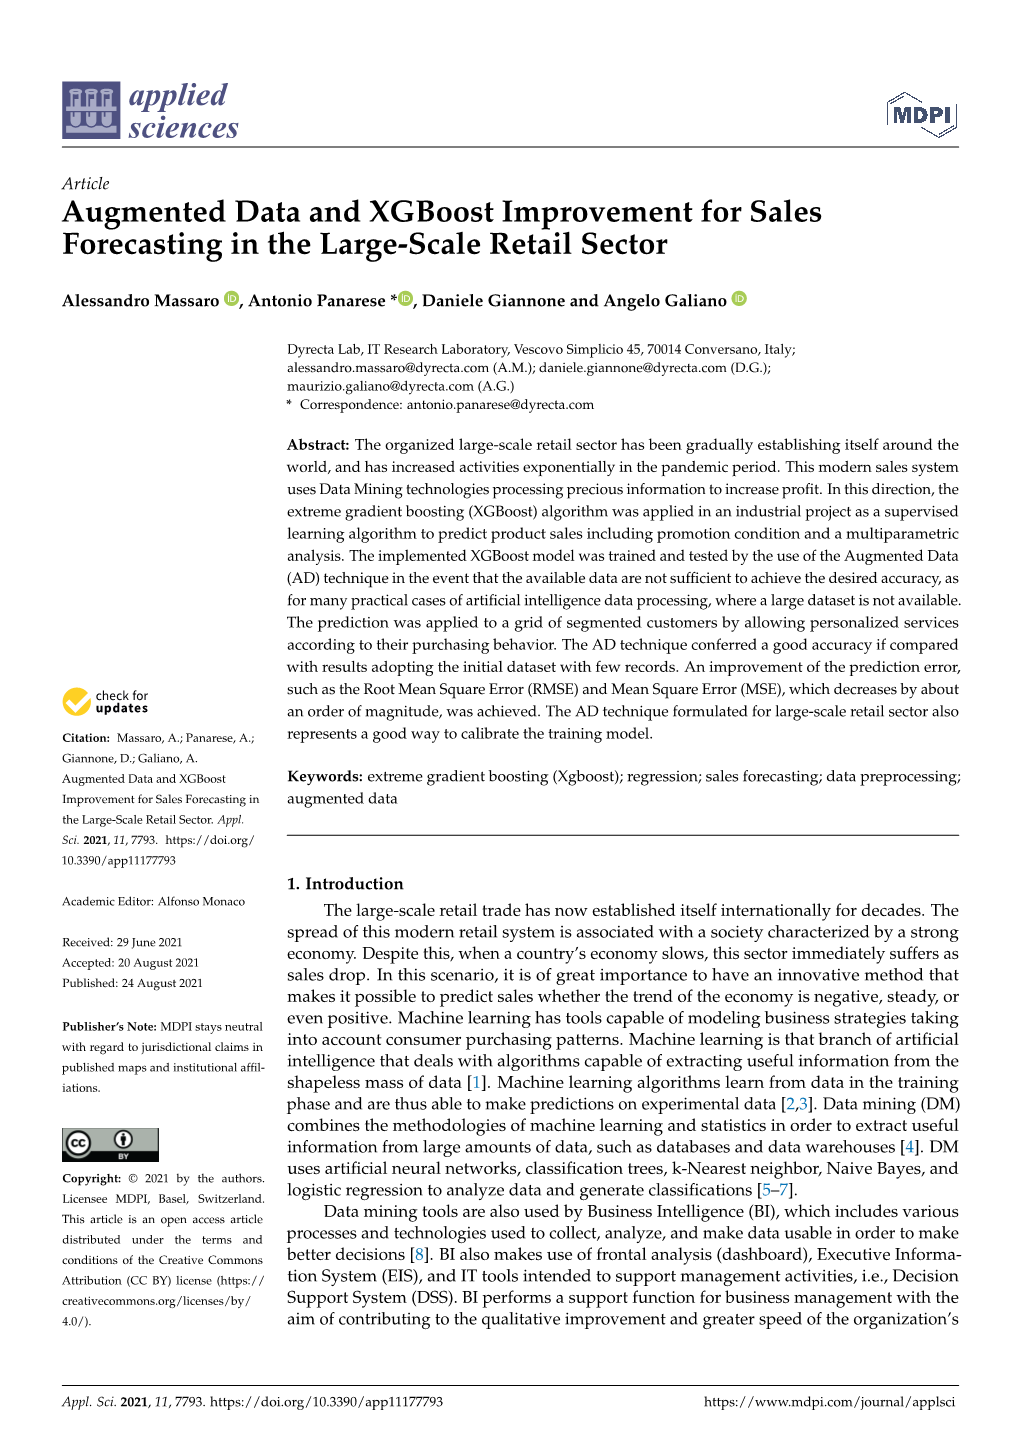 Augmented Data and Xgboost Improvement for Sales Forecasting in the Large-Scale Retail Sector